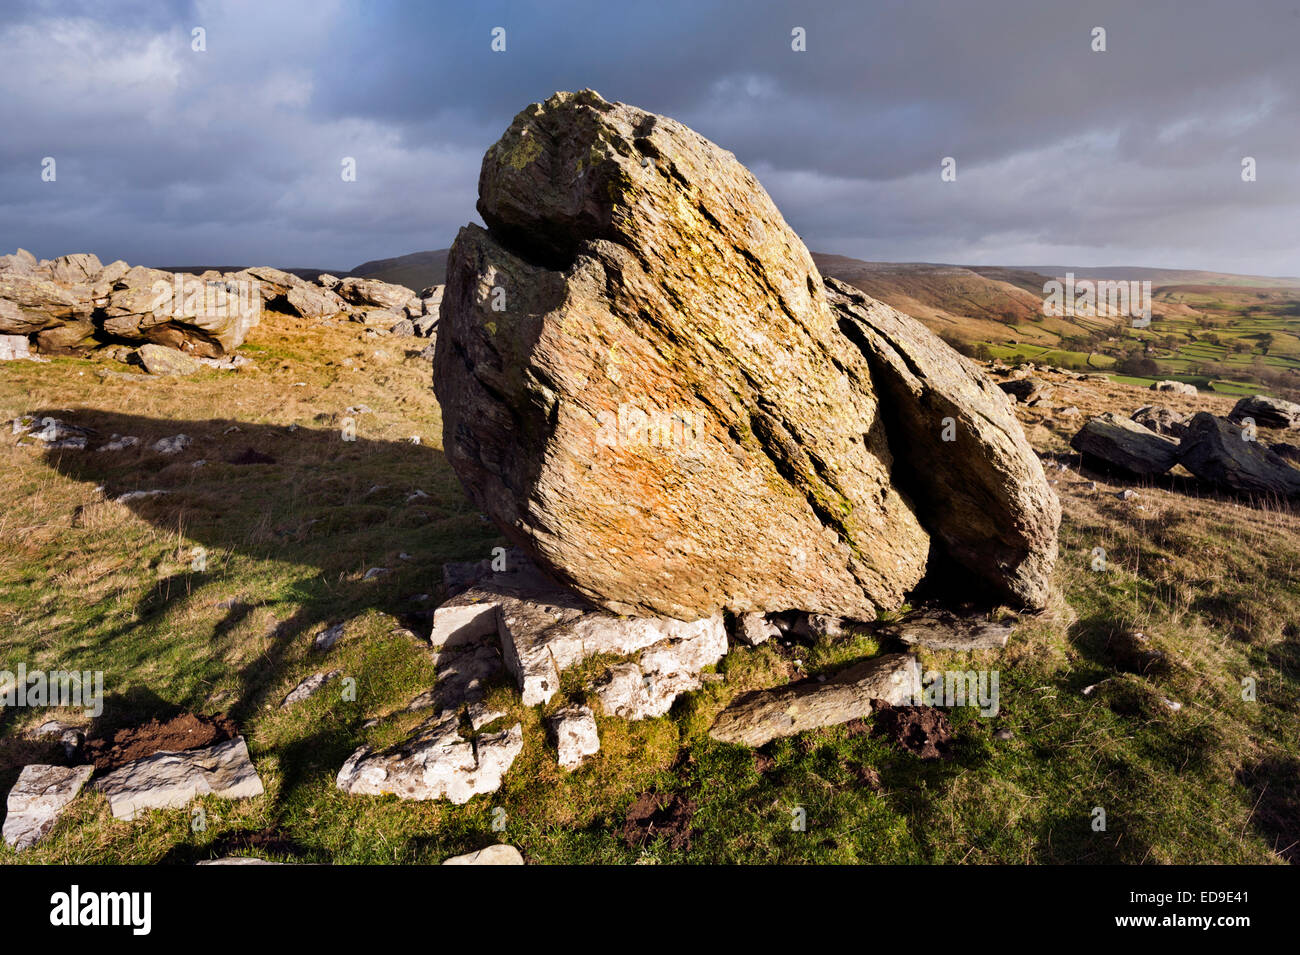 The Norber Stones, glacial erratic boulders, near Austwick, North Yorkshire, UK Stock Photo